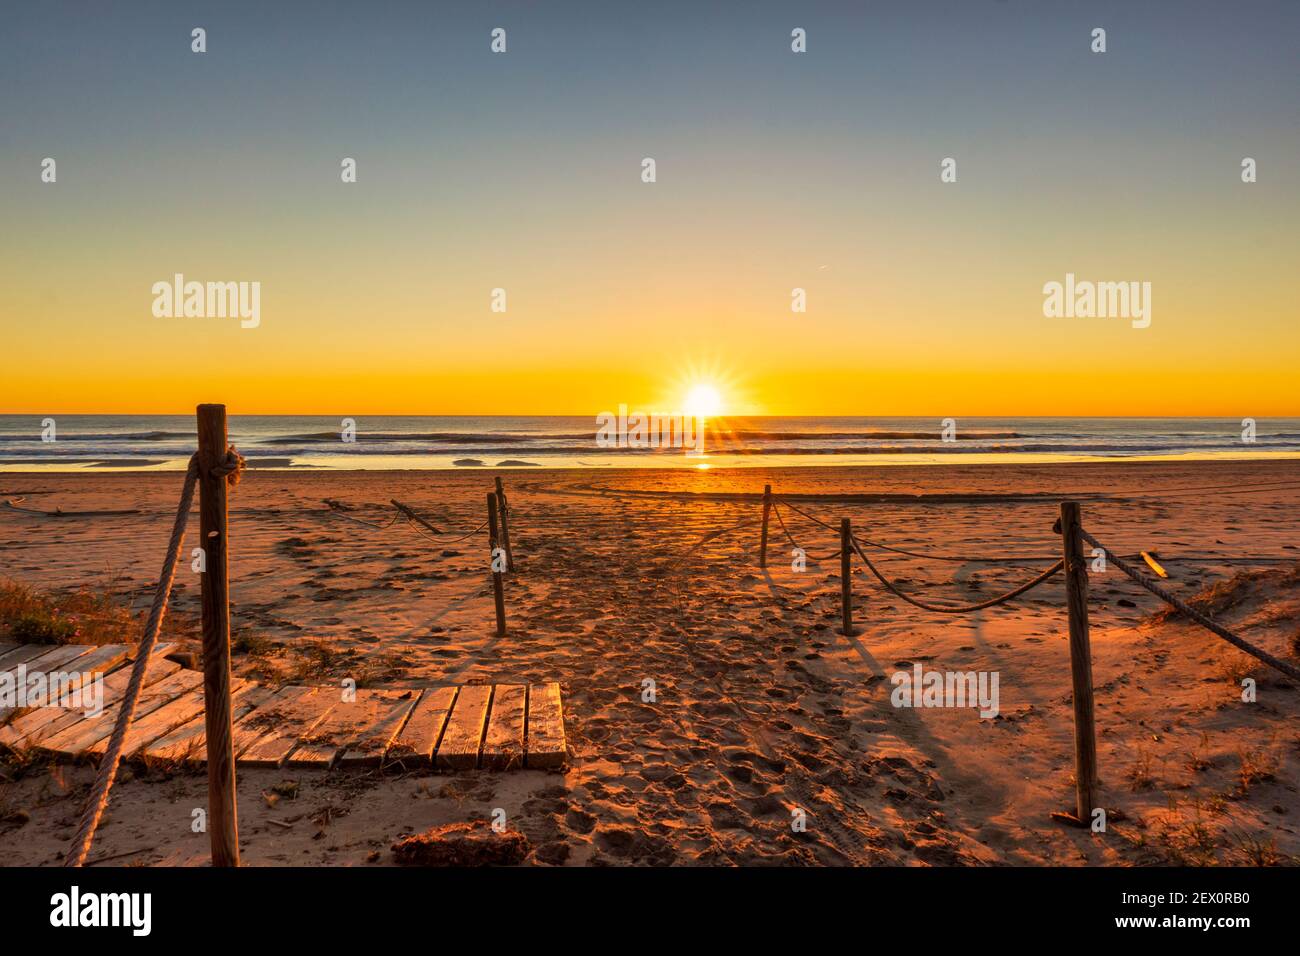 The beach during a nice and calm sunrise Stock Photo